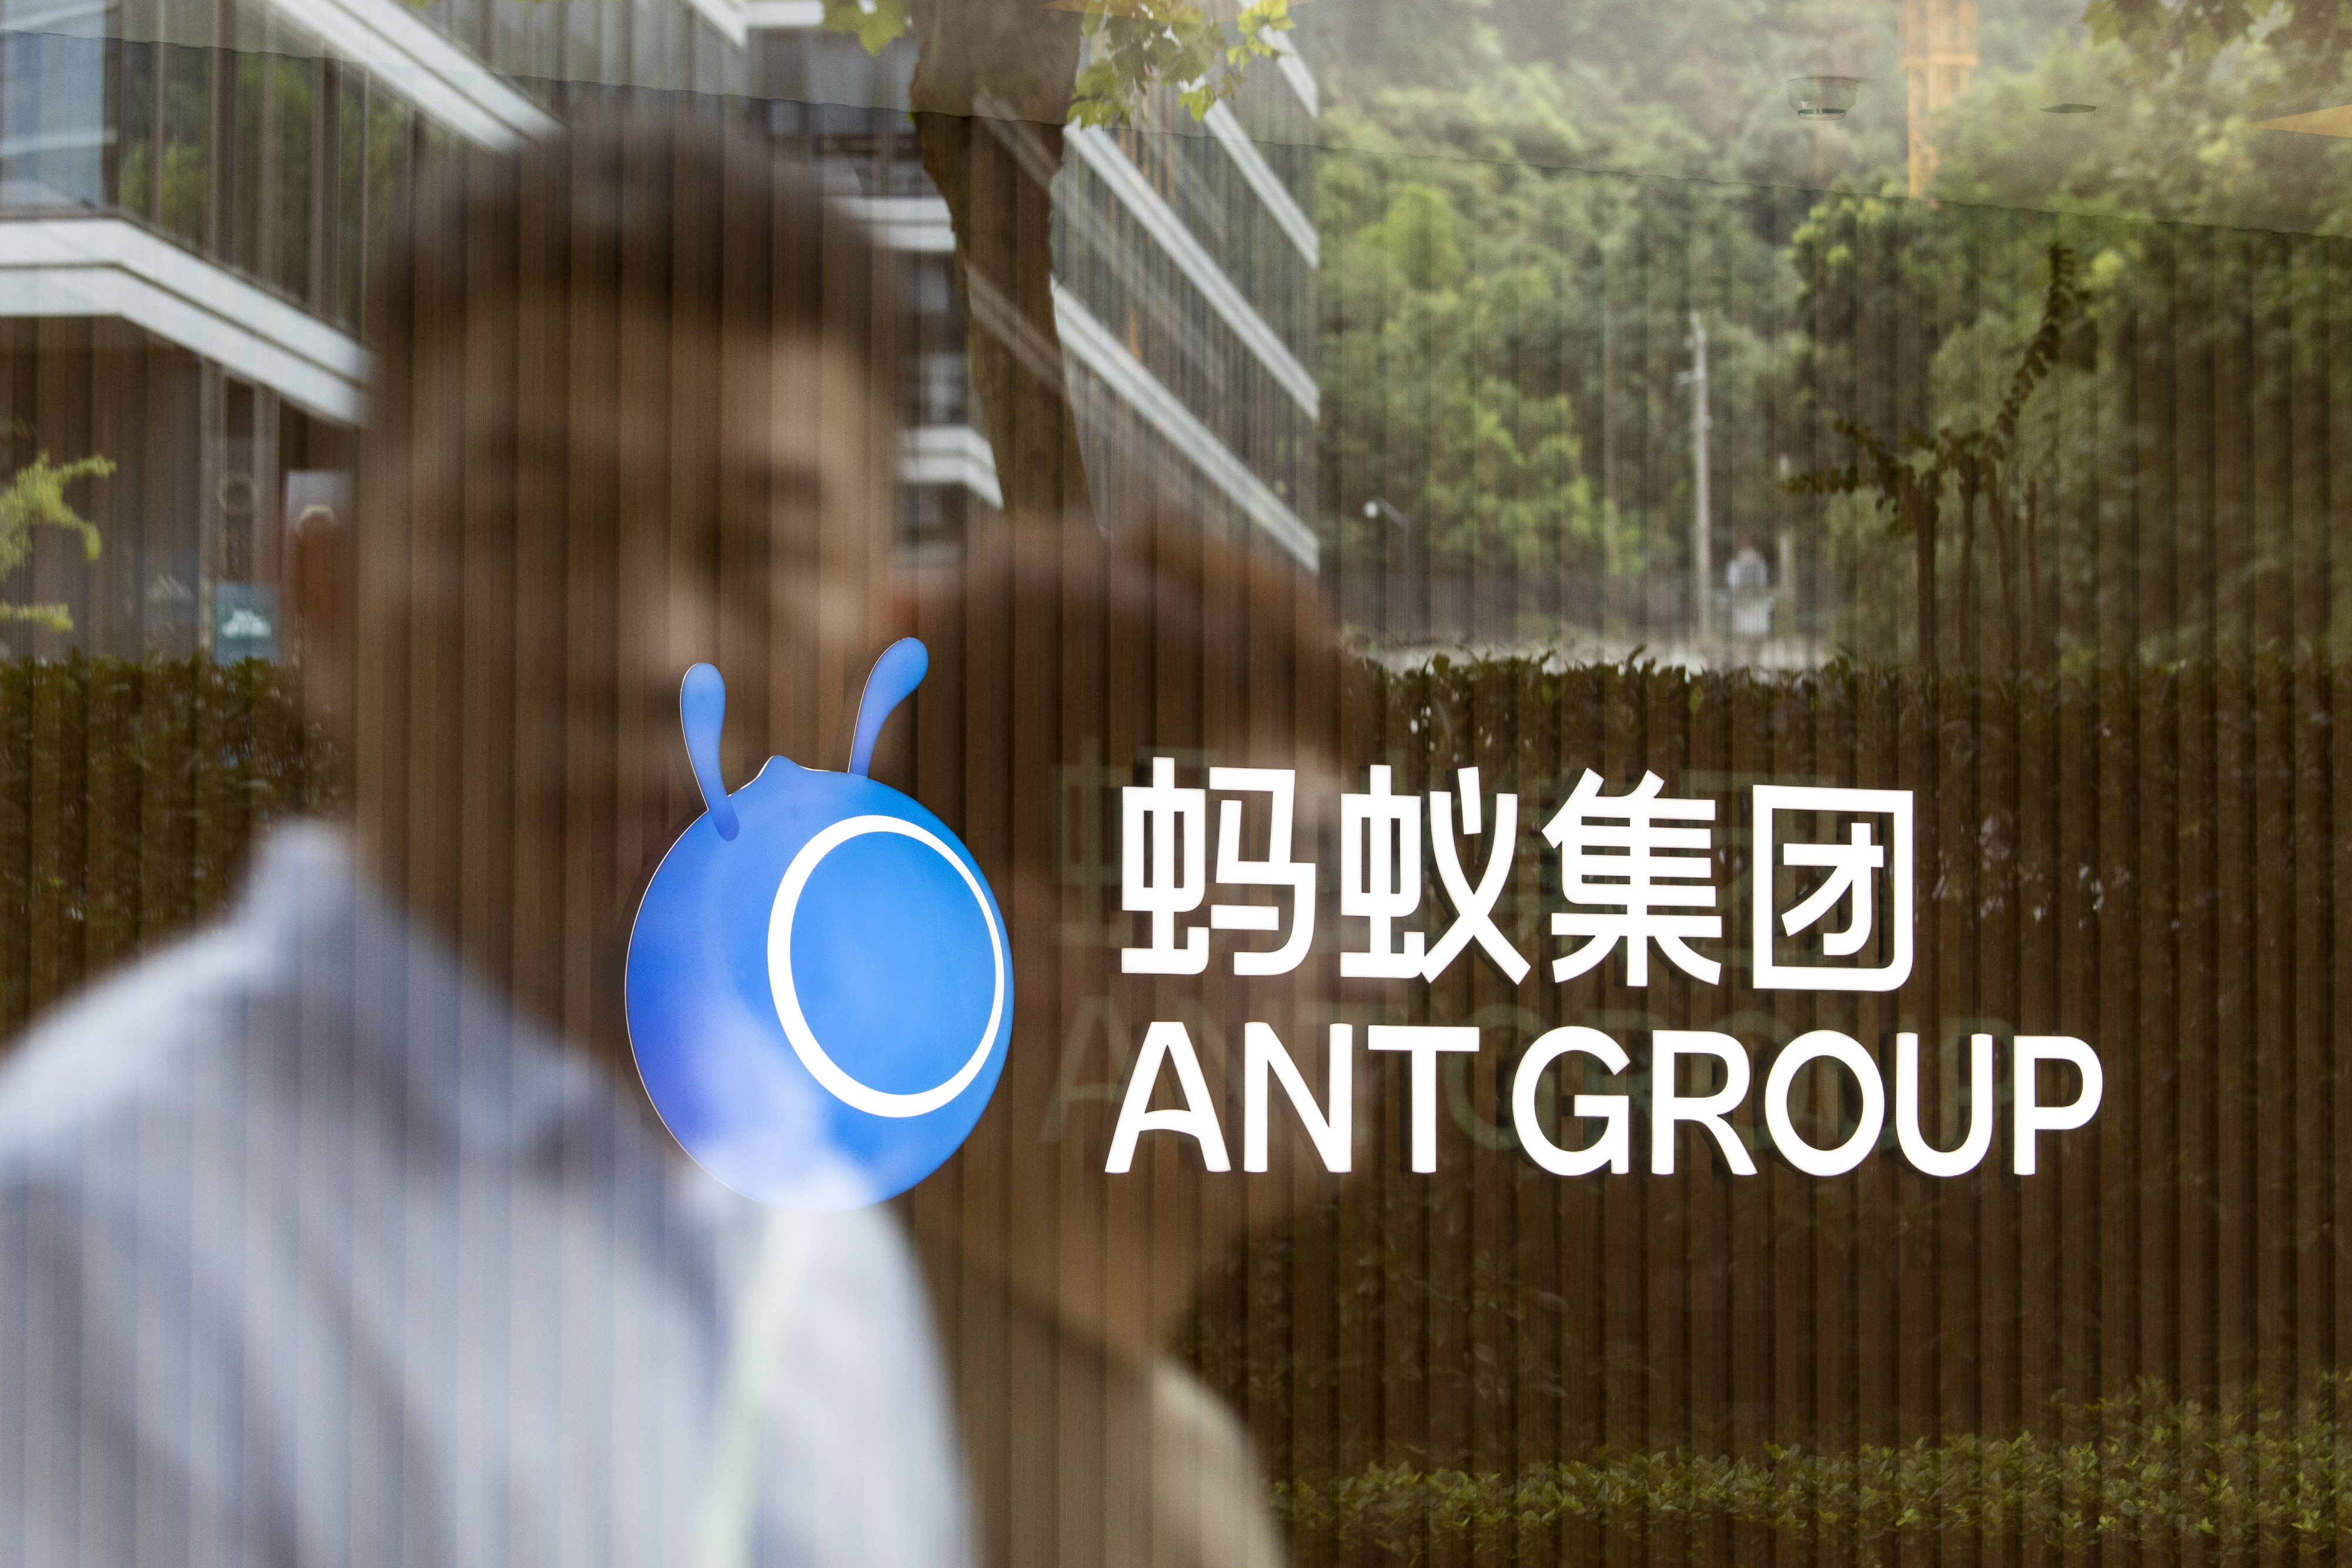 The Ant Group logo is seen at the company’s headquarters in Hangzhou, China, Aug. 2, 2021. Photo: Bloomberg